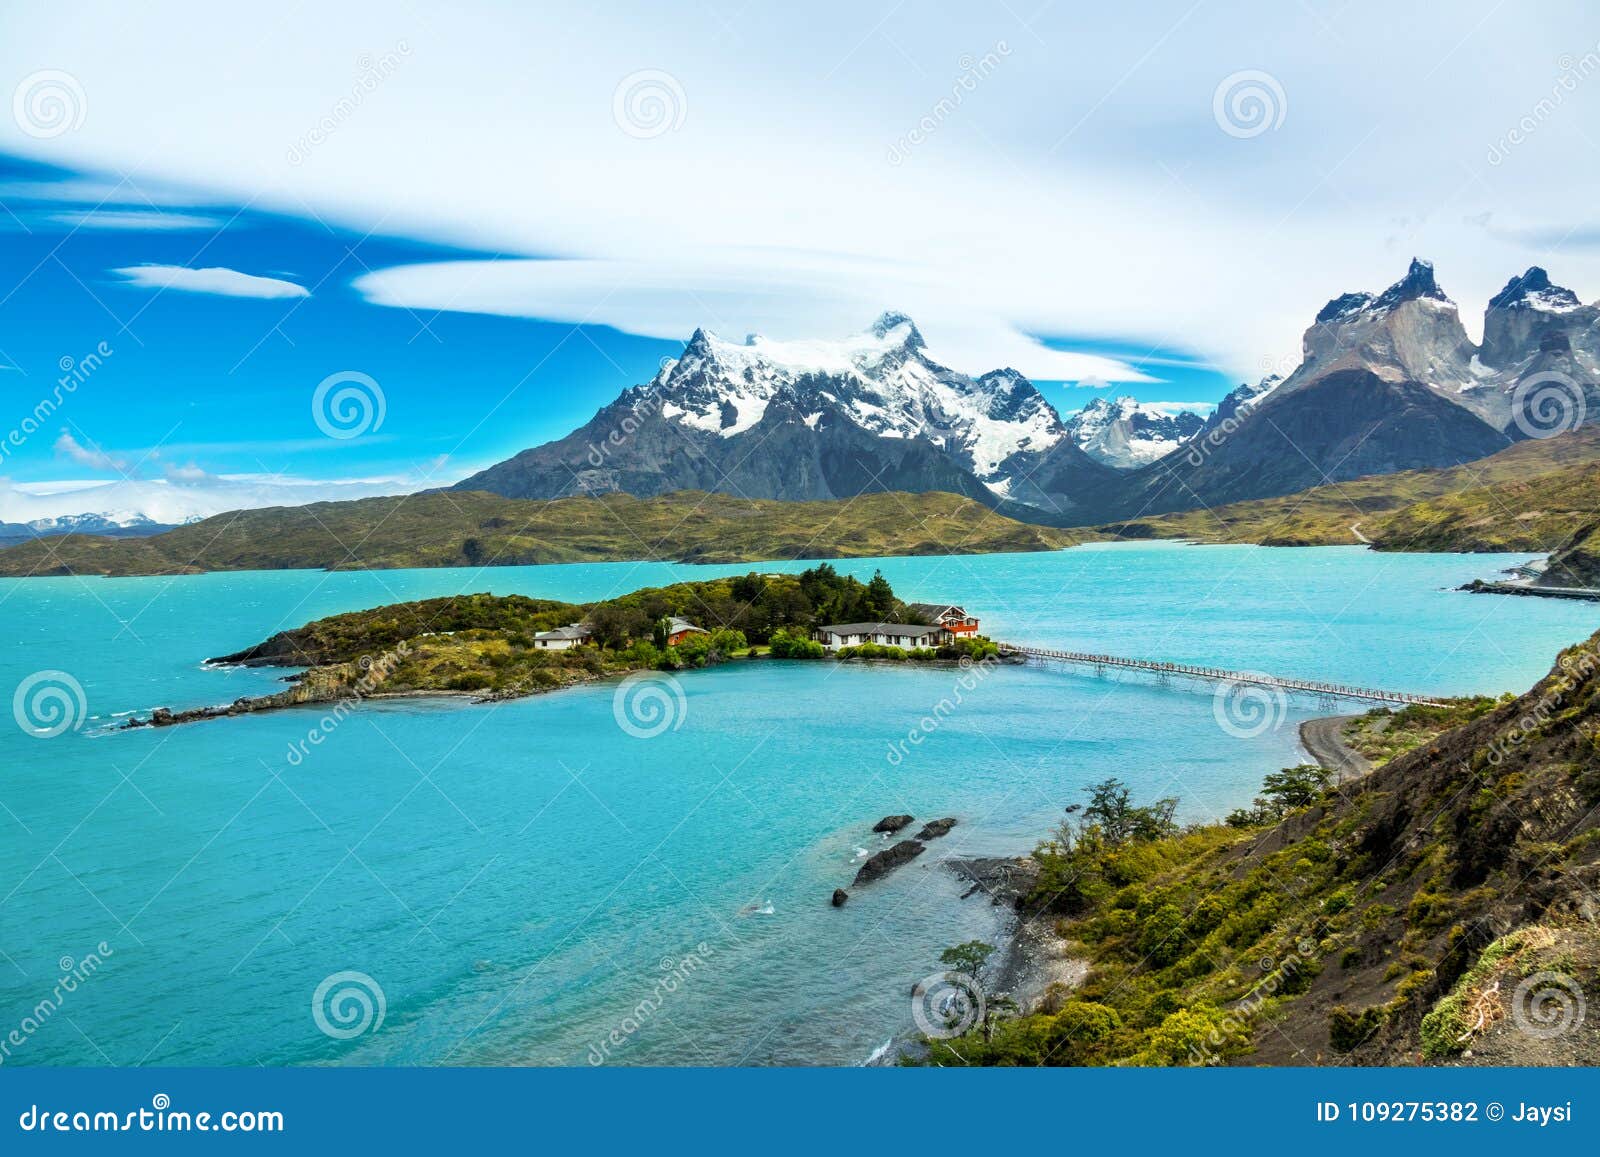 pehoe lake and guernos mountains landscape, national park torres del paine, patagonia, chile, south america